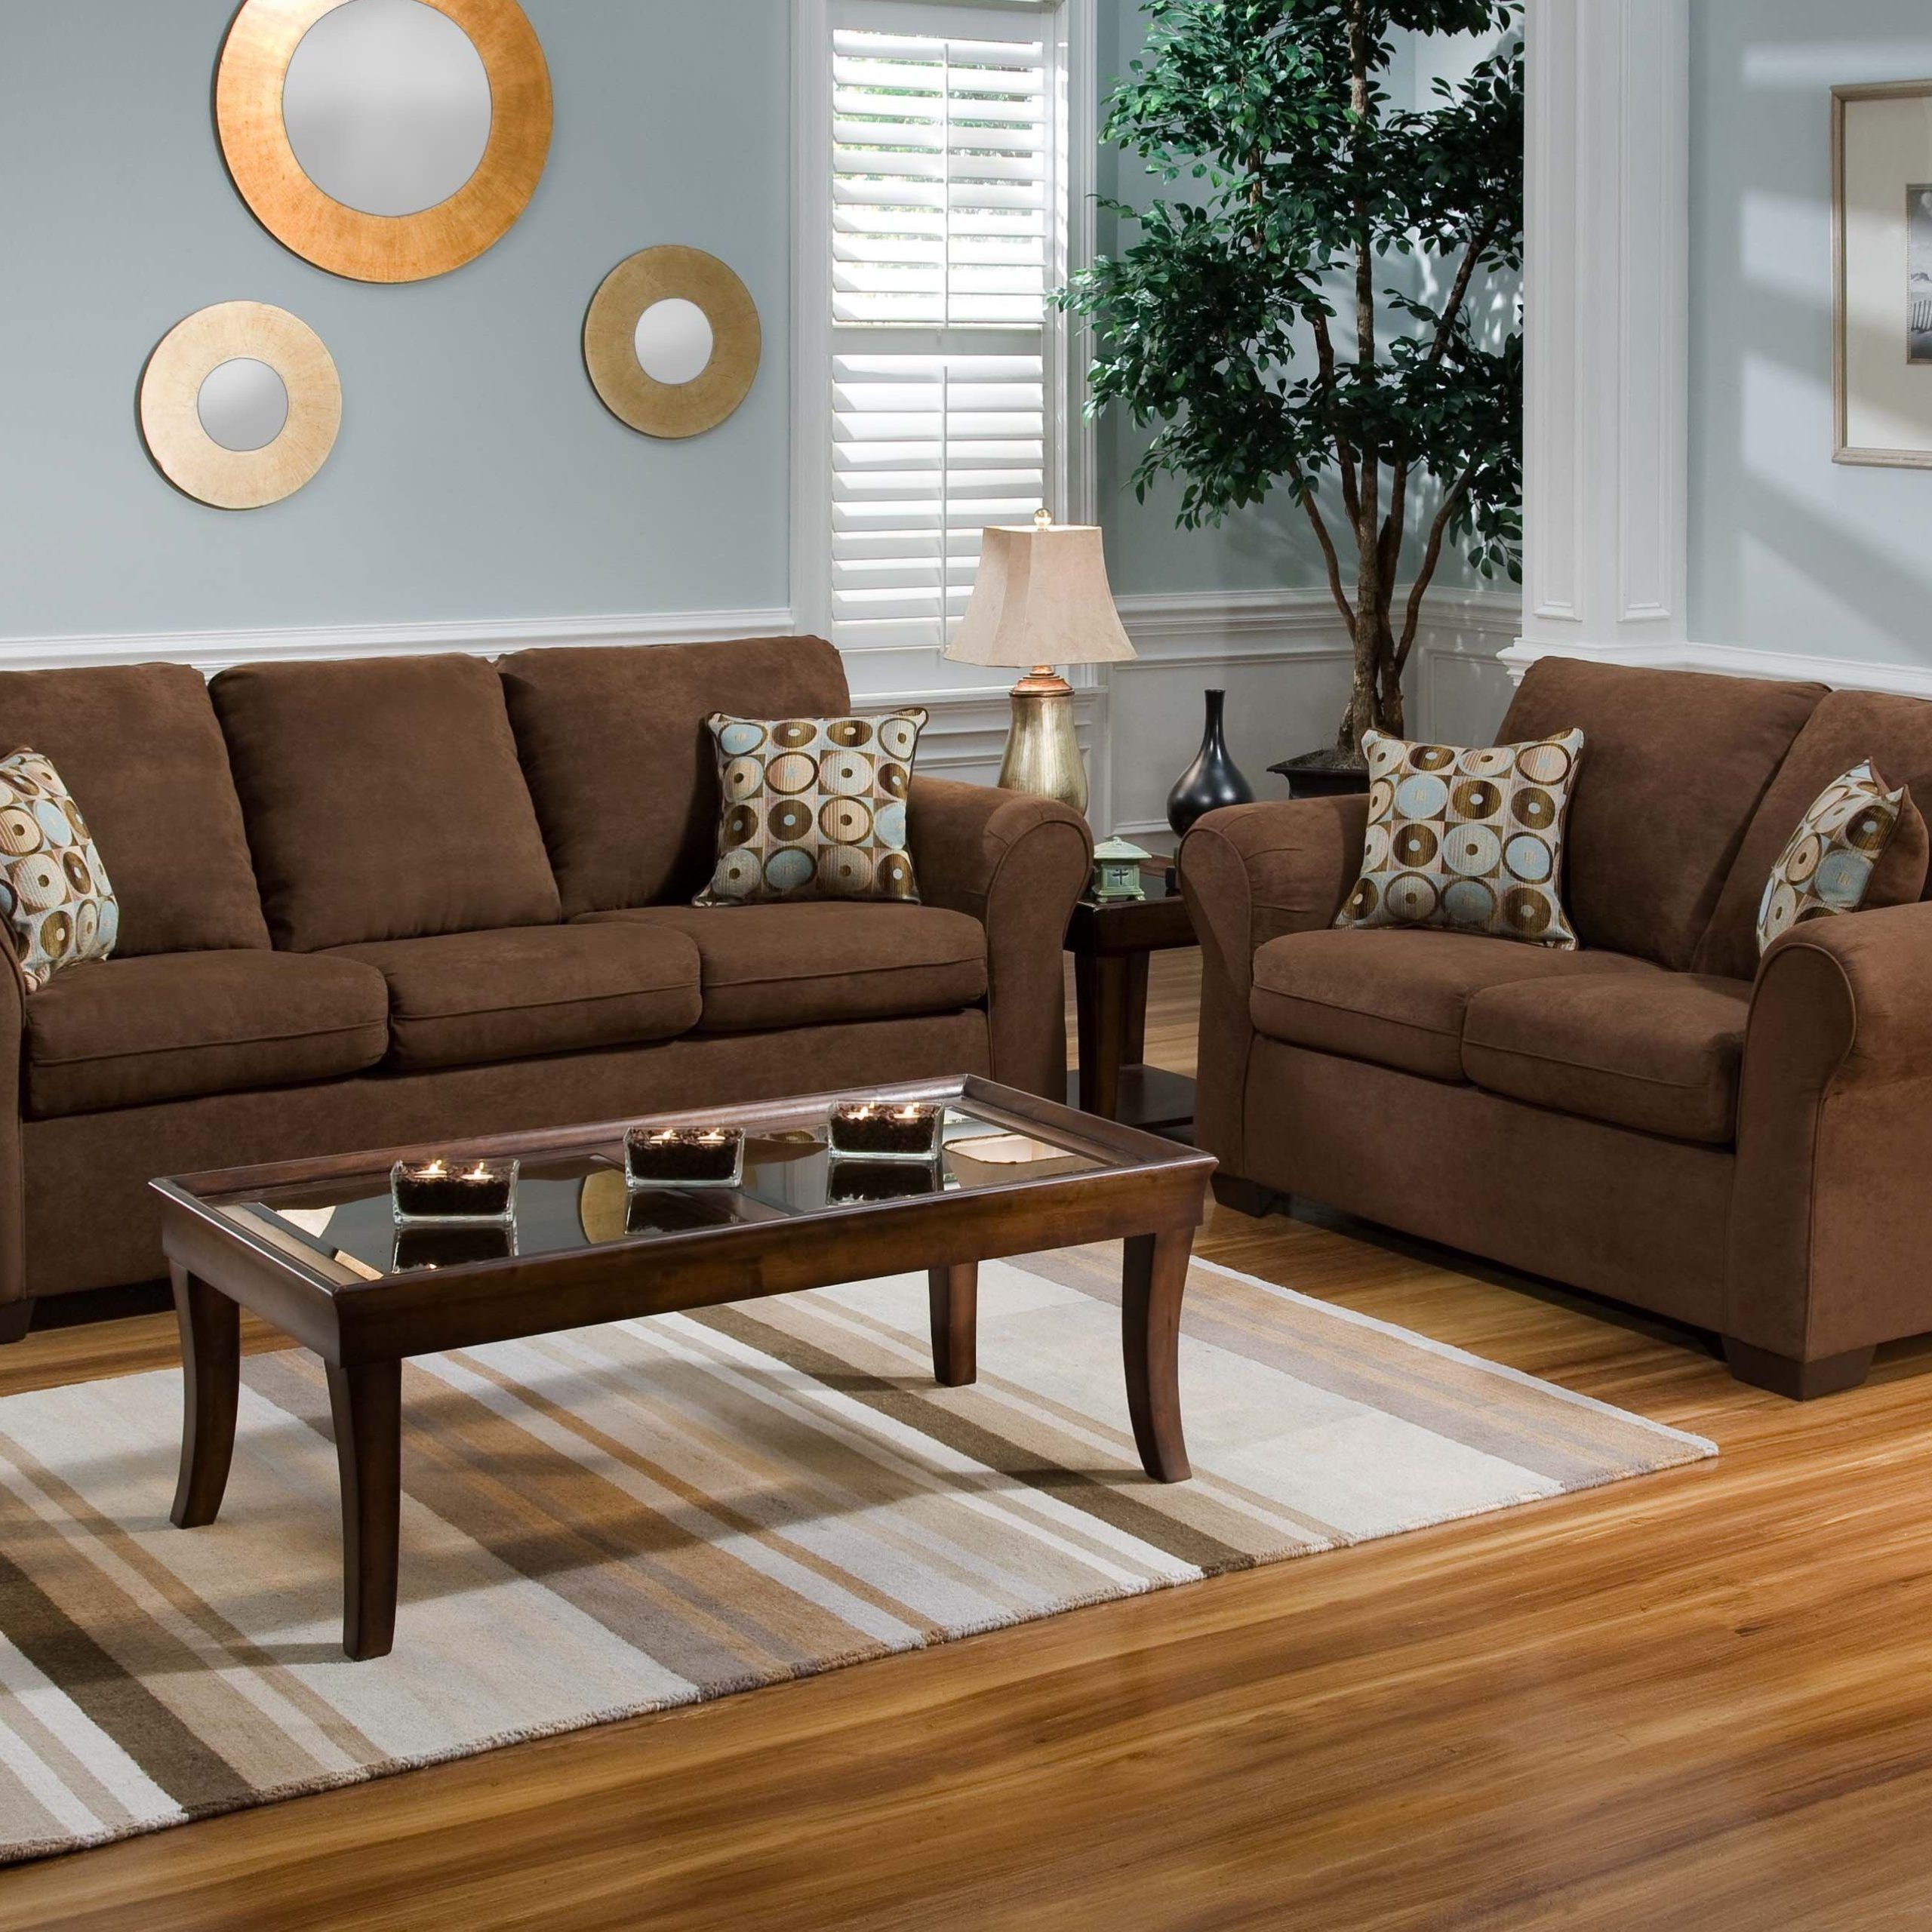 Wood Flooring Color To Complement Brown Leather And Oak Furniture With Sofas In Chocolate Brown (Gallery 9 of 20)